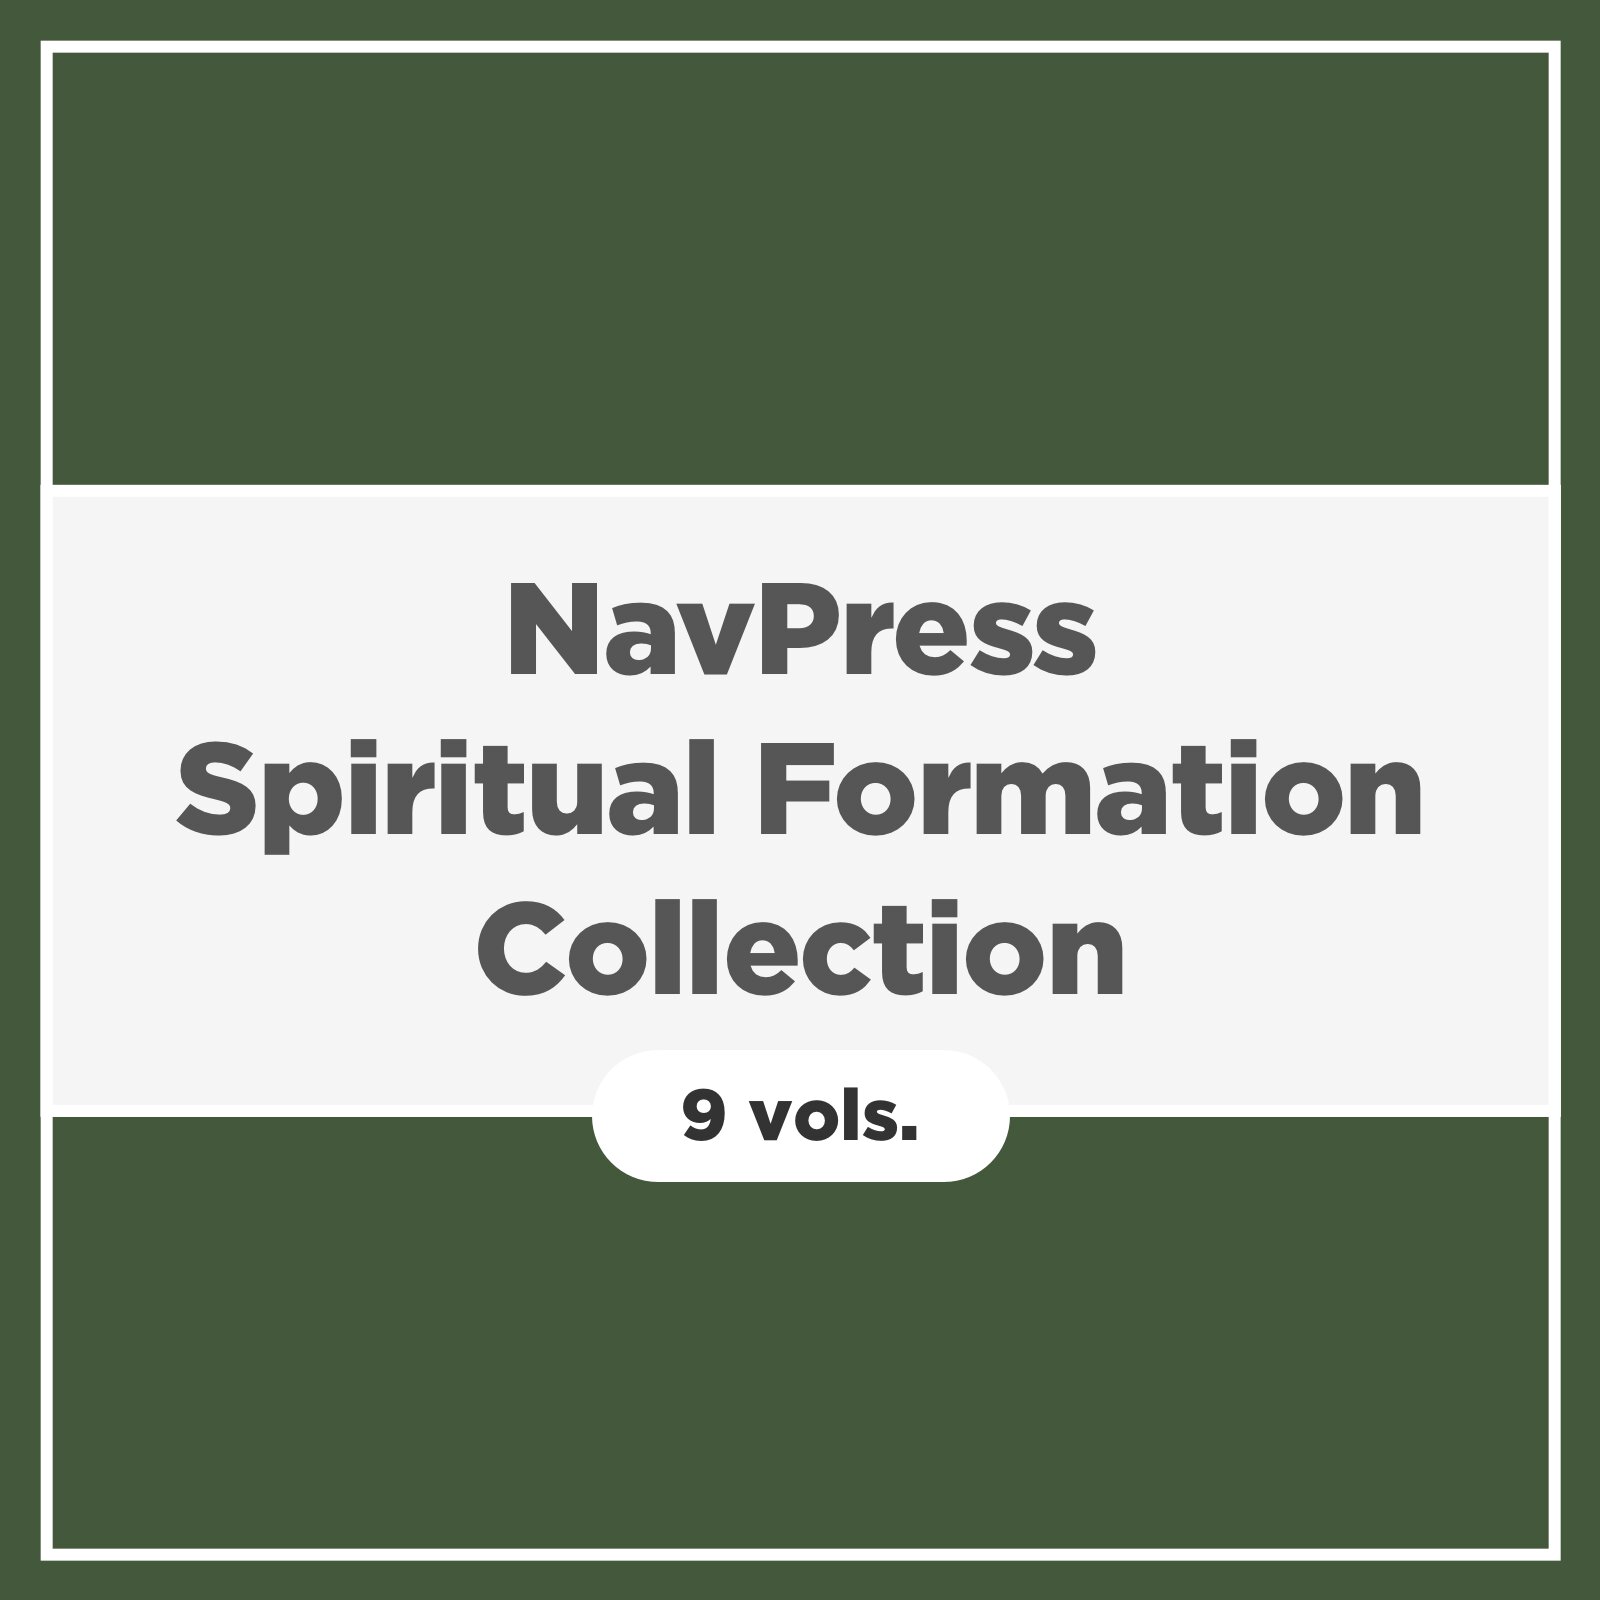 NavPress Spiritual Formation Collection (9 vols.)